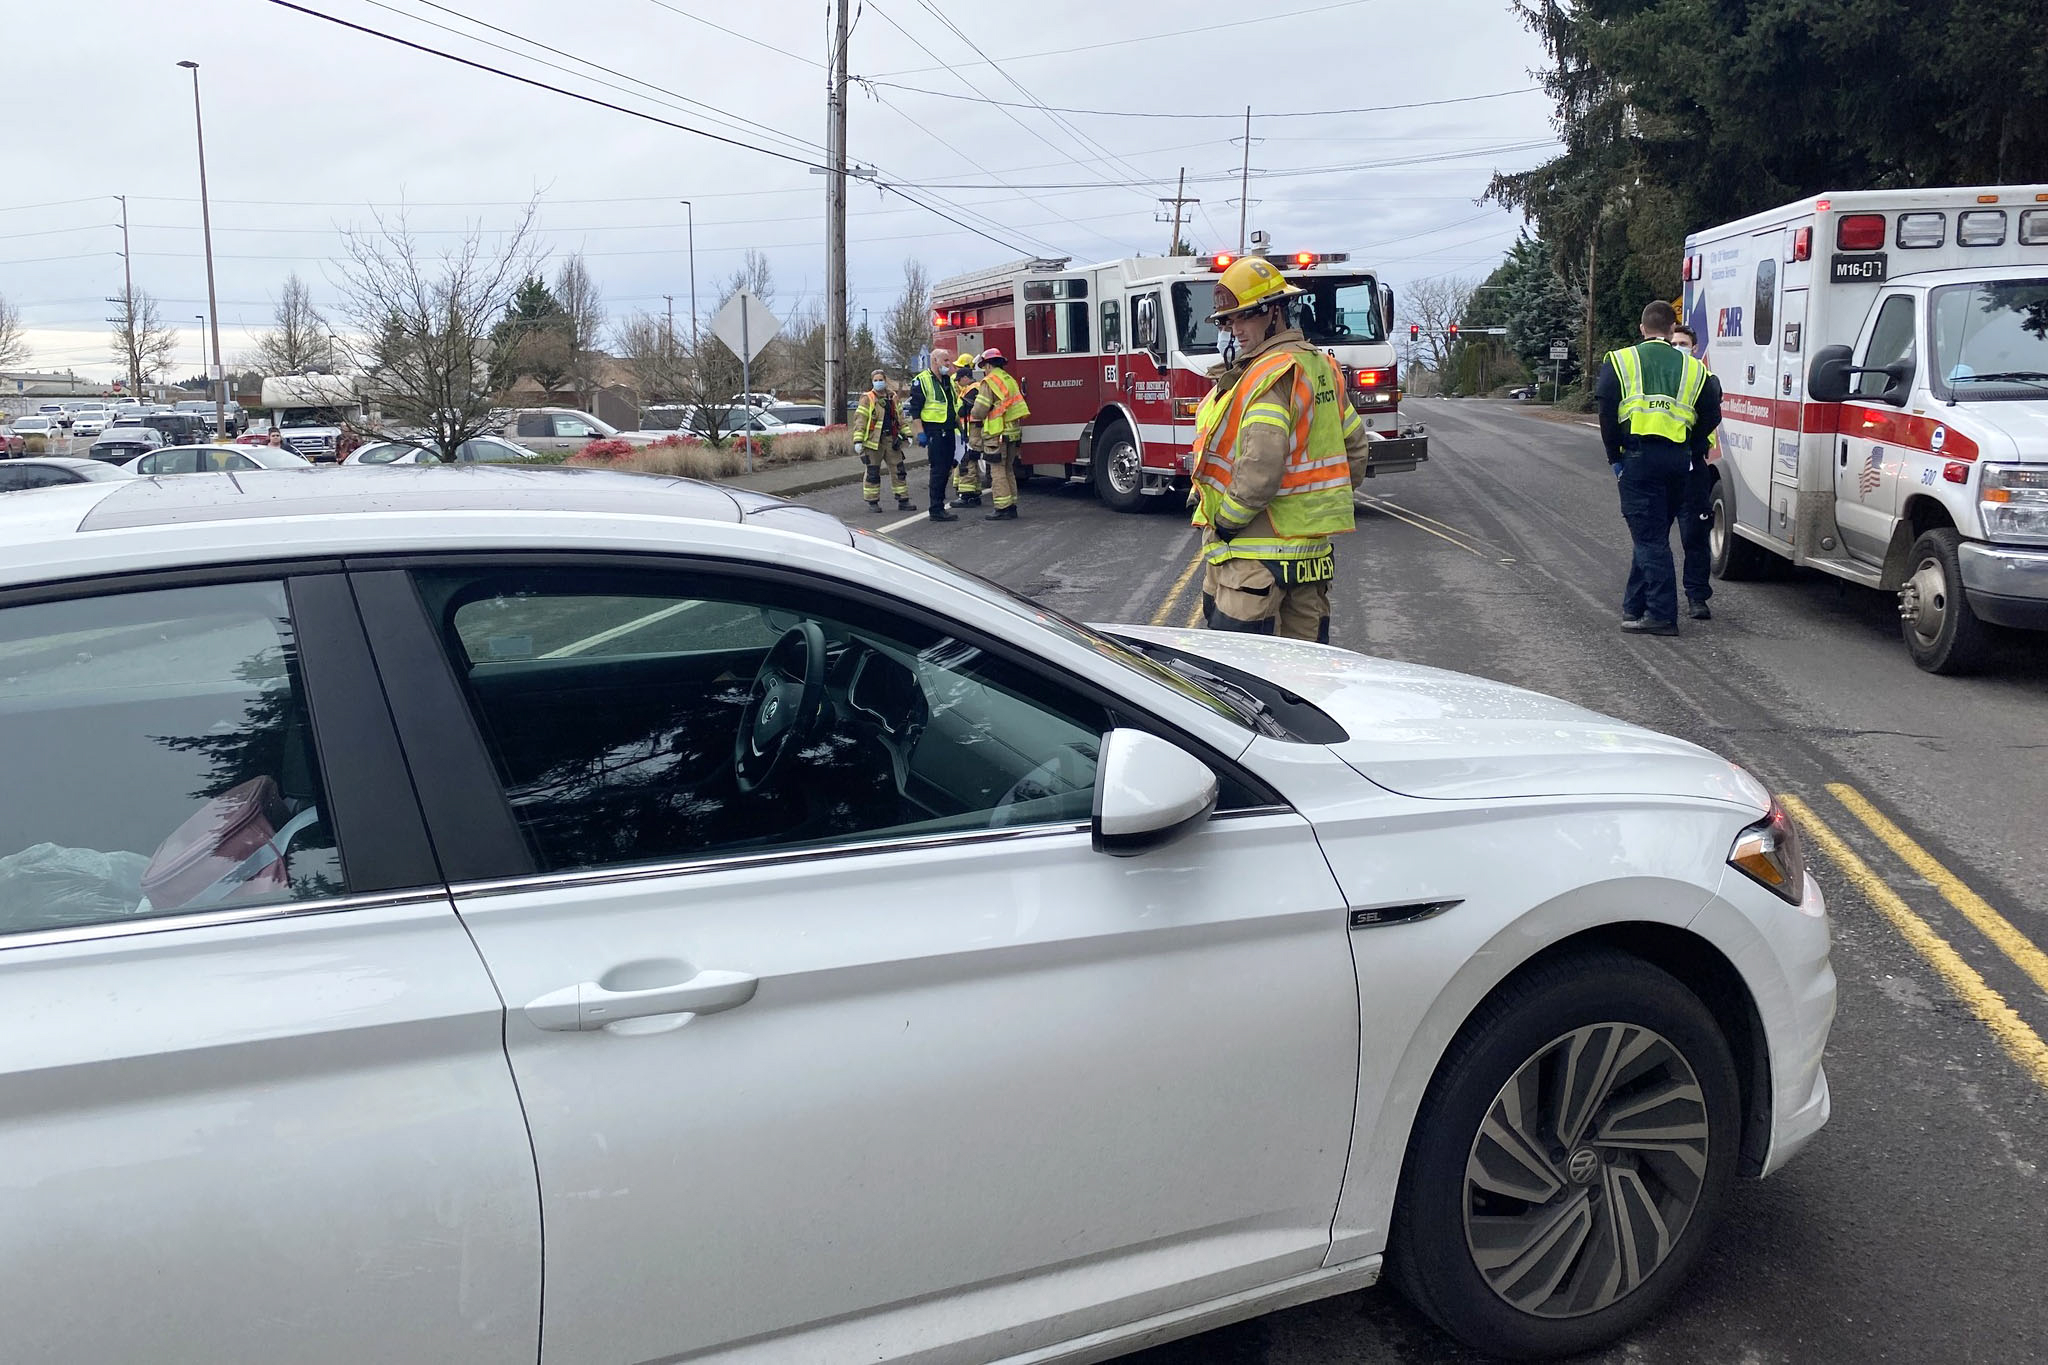 A 39-year-old Vancouver man was killed Friday afternoon when his motorcycle collided with a car in Hazel Dell, according to the Clark County Sheriff’s Office.